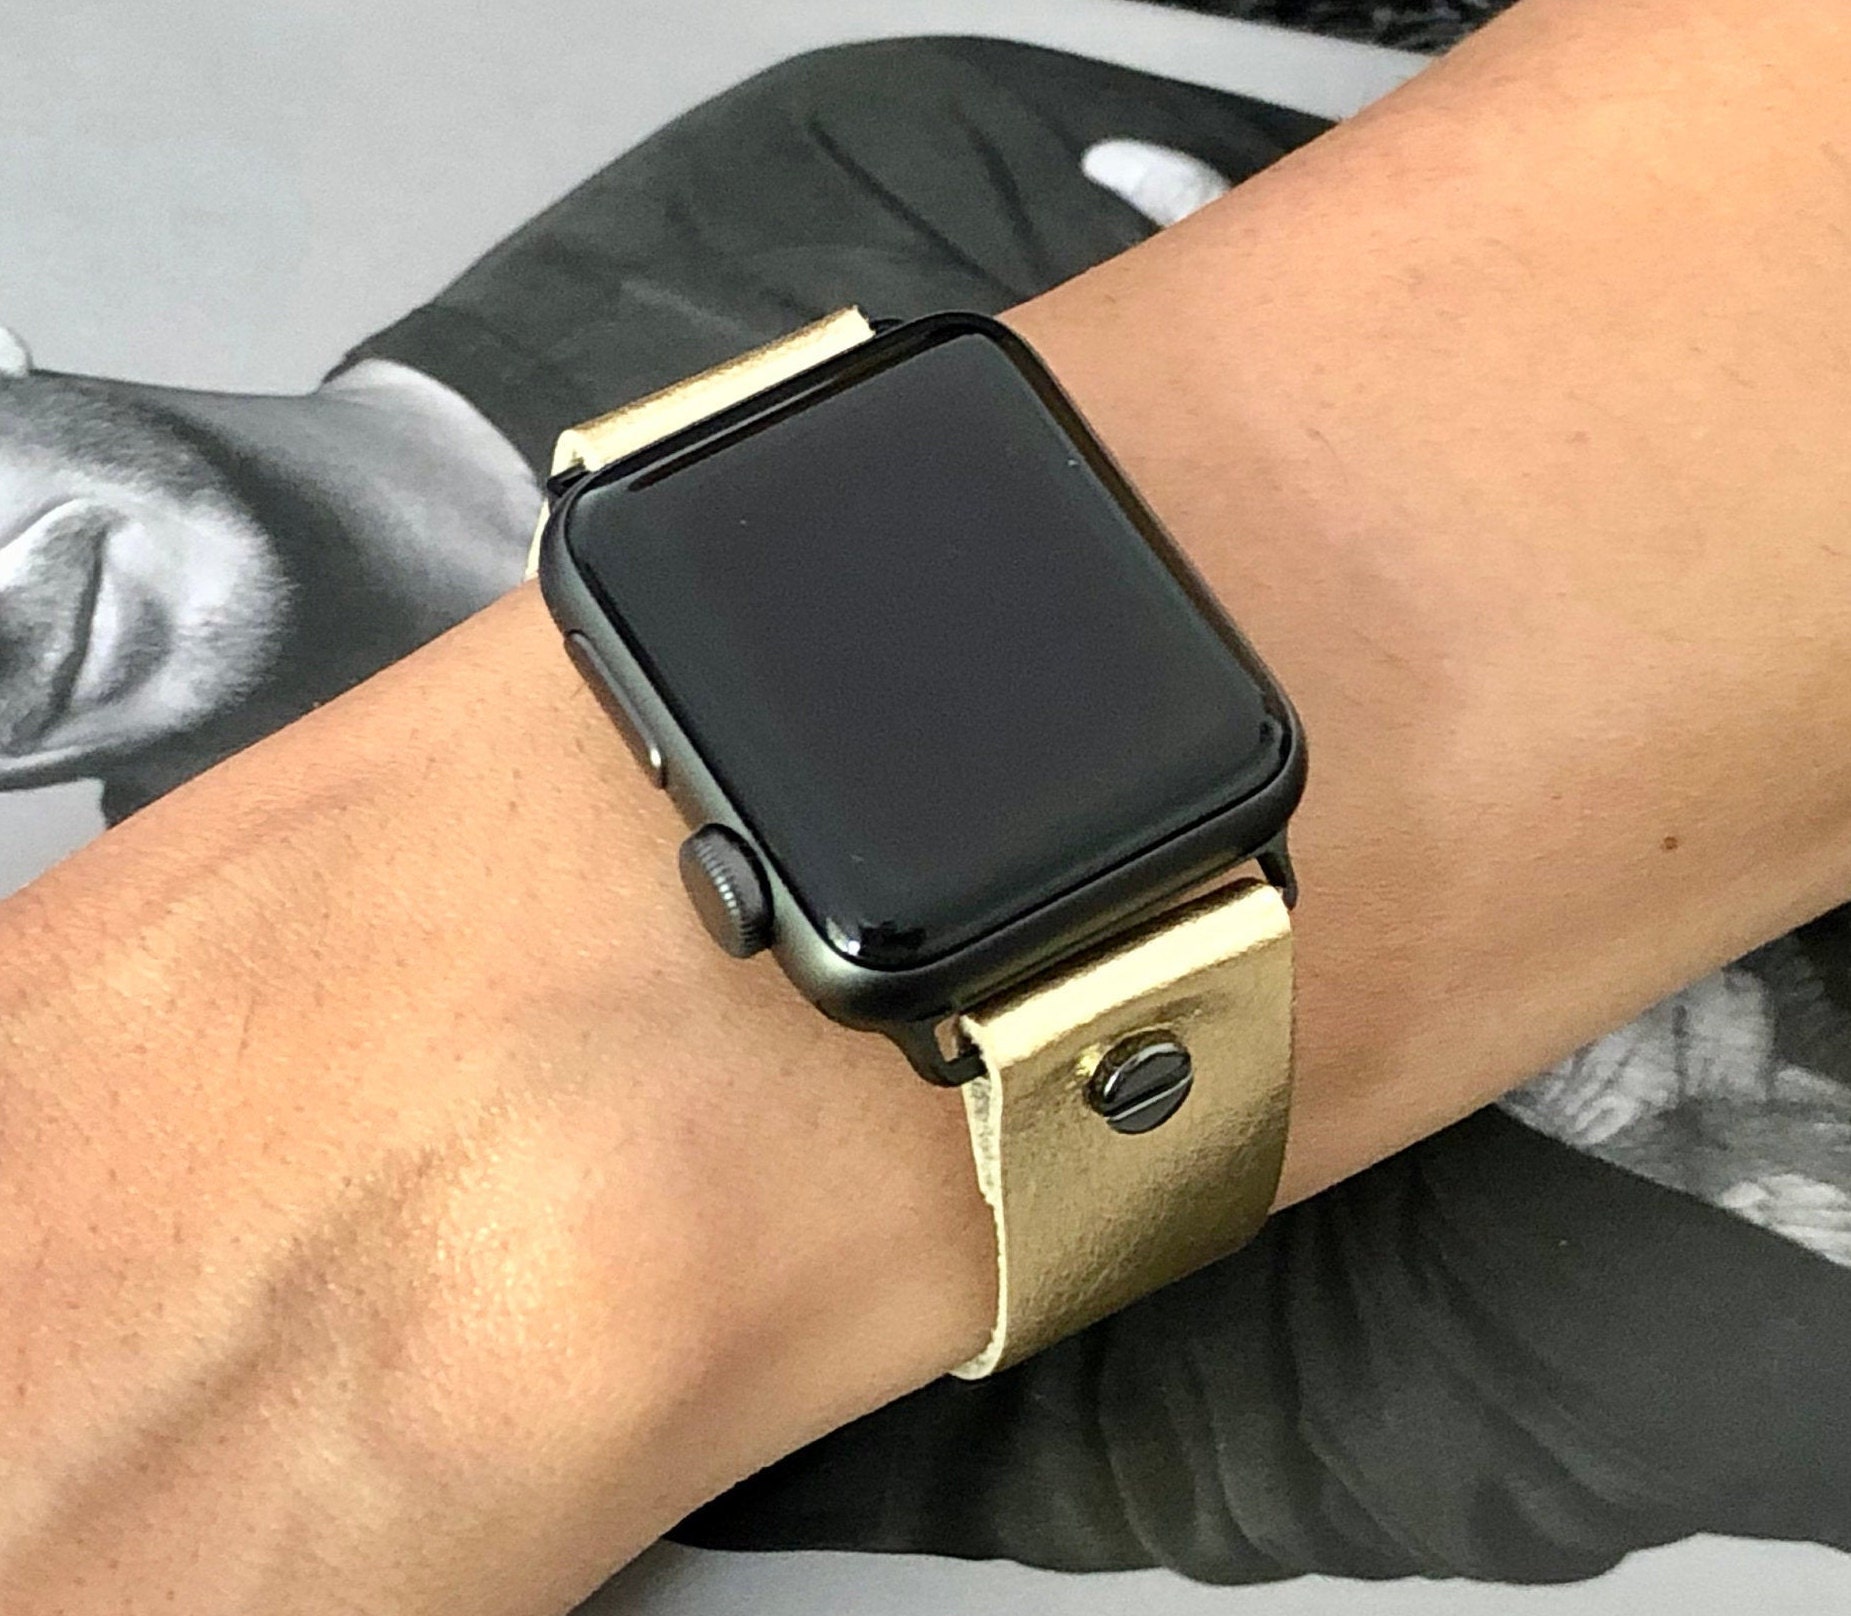 How To Measure Wrist Size For Apple Watch